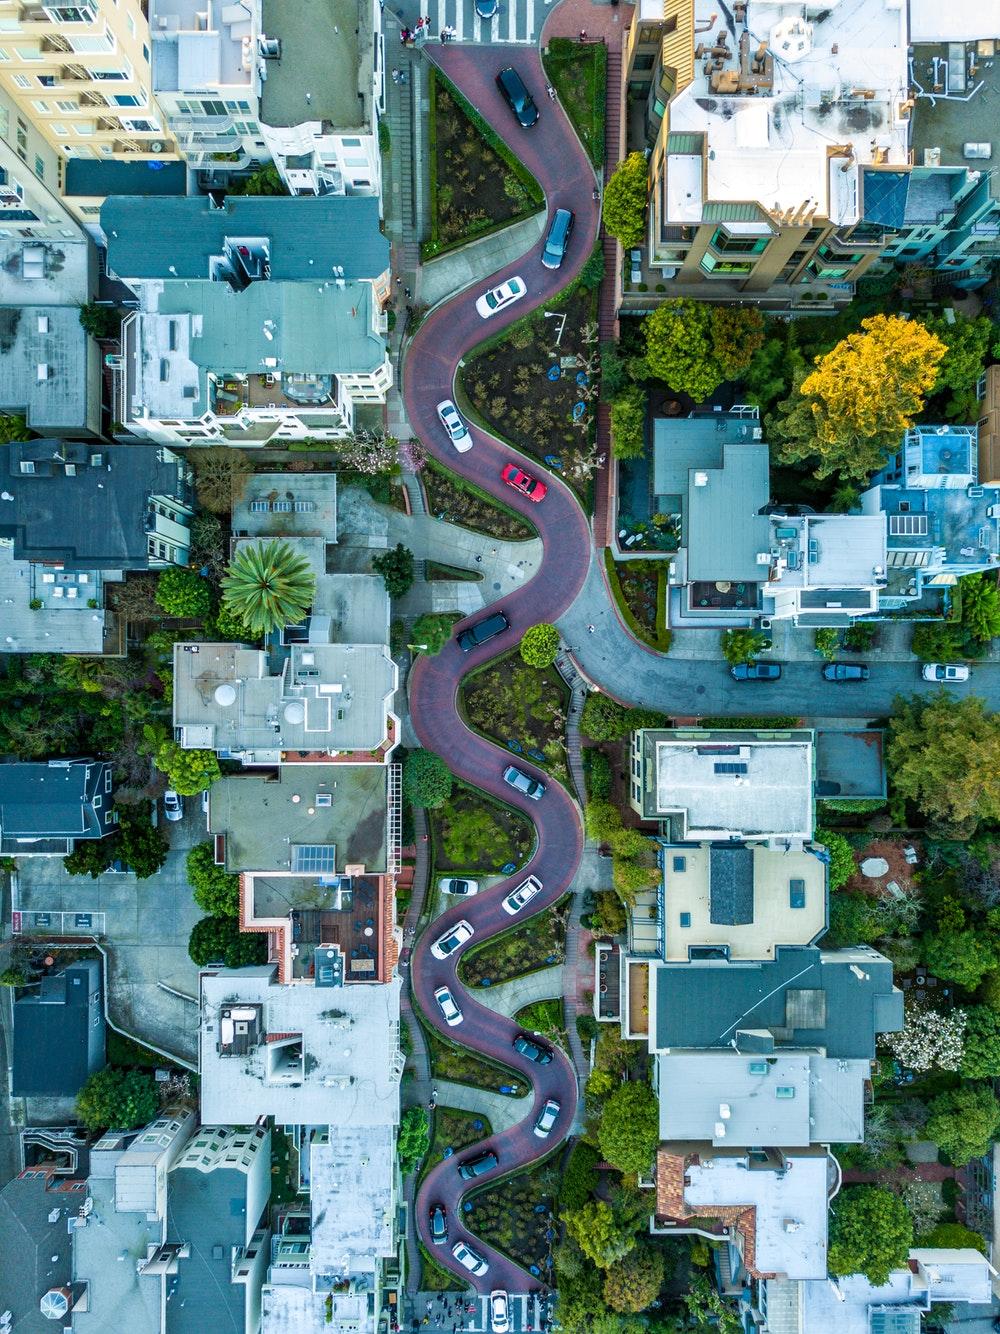 Lombard Street Picture. Download Free Image